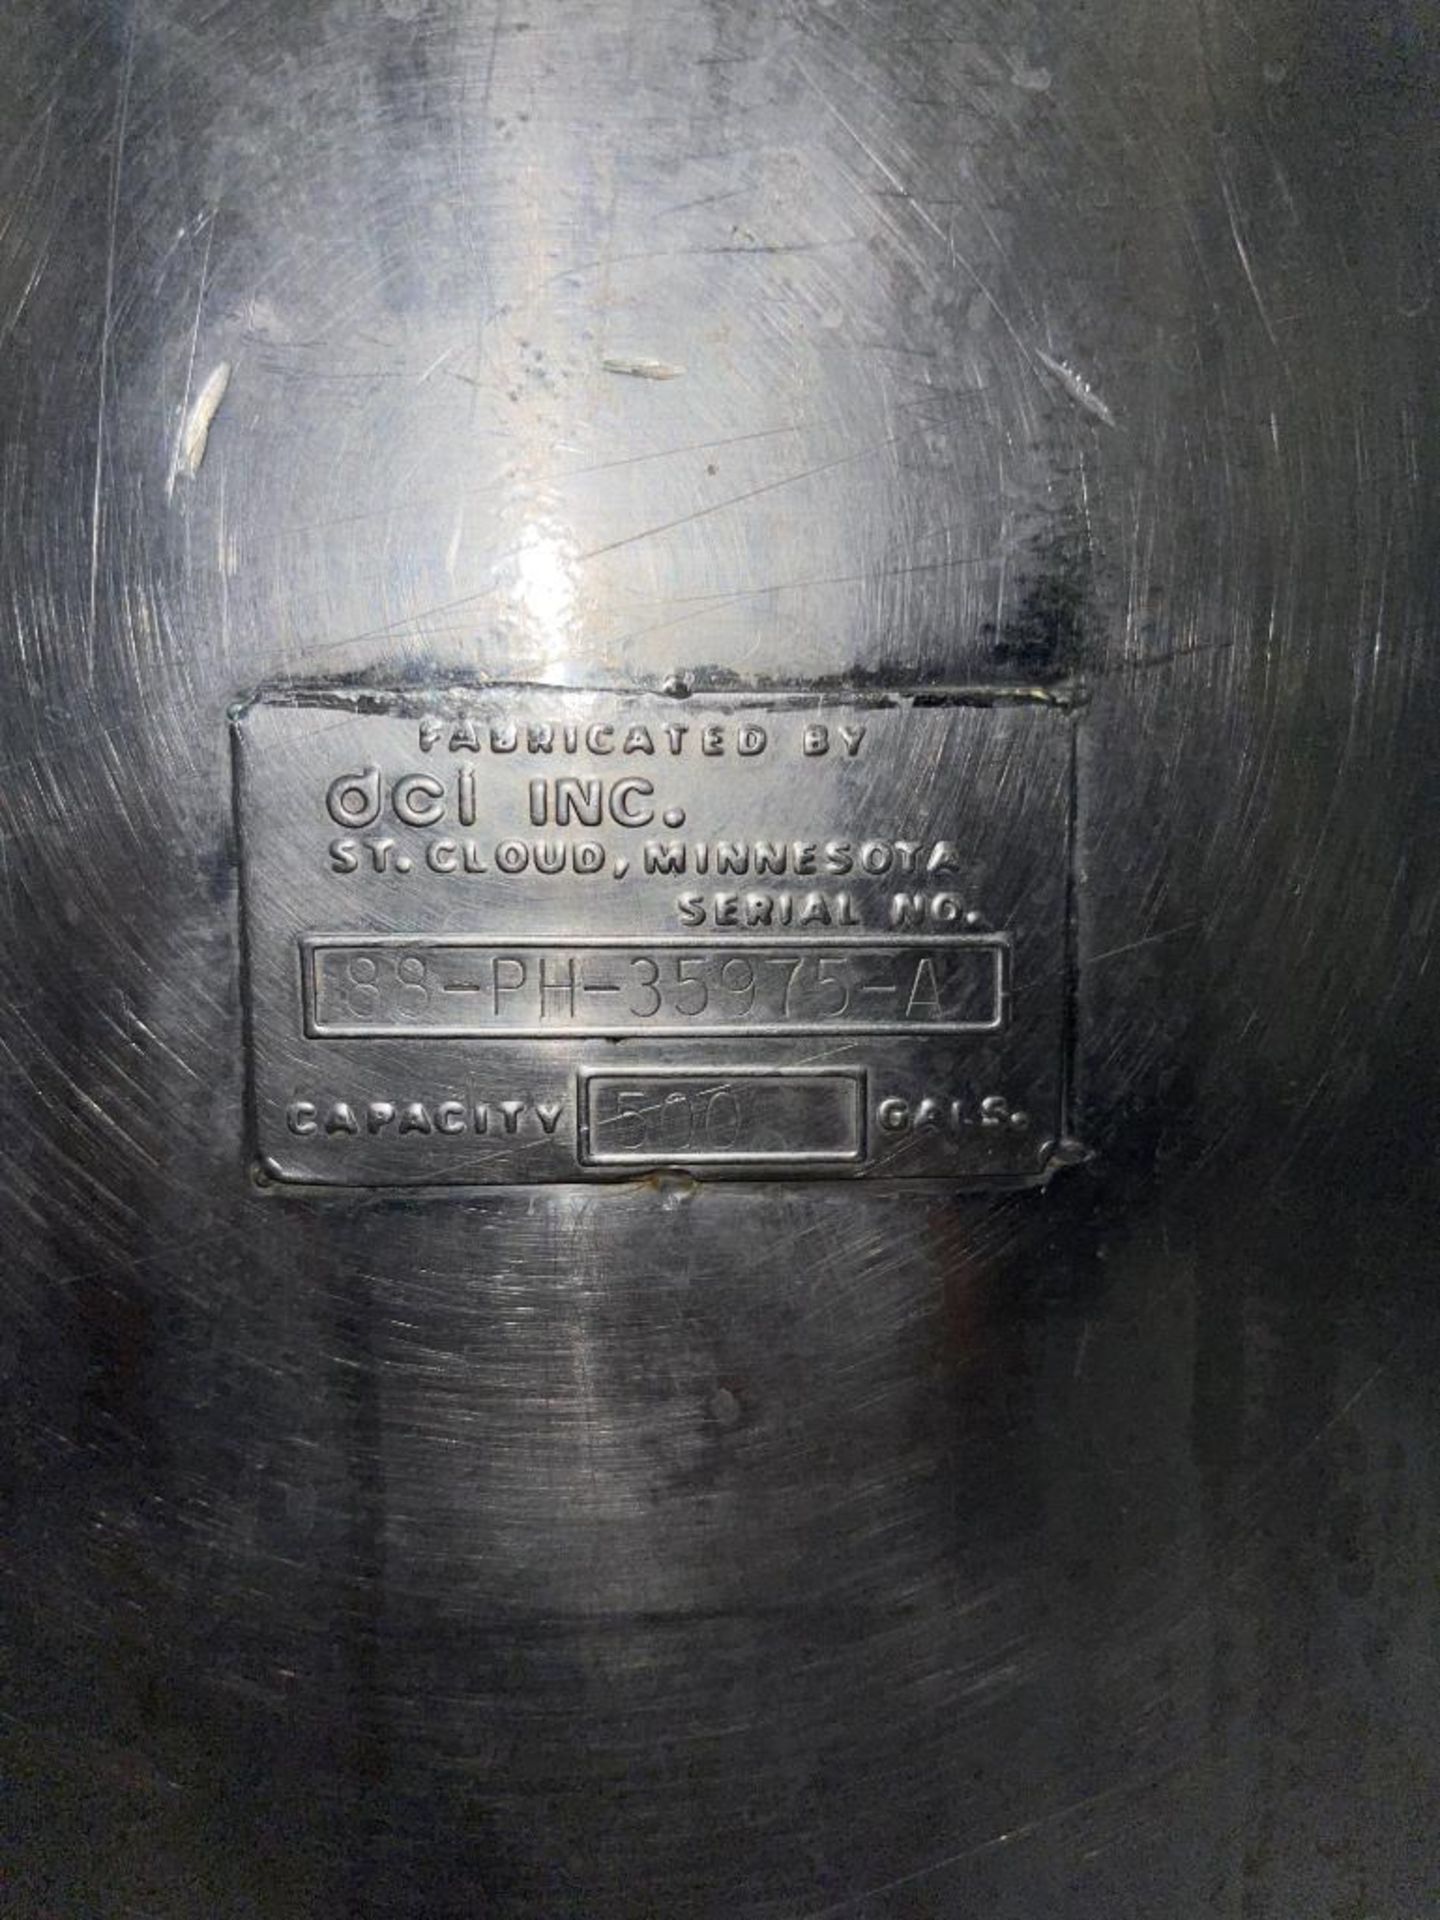 DCI MIXER KETTLE; 500 GALLON; 316 L SS; WITH SWEEP, TURBINE AND HOMENGIZER; 130PSI @300F JACKET ASME - Image 8 of 15